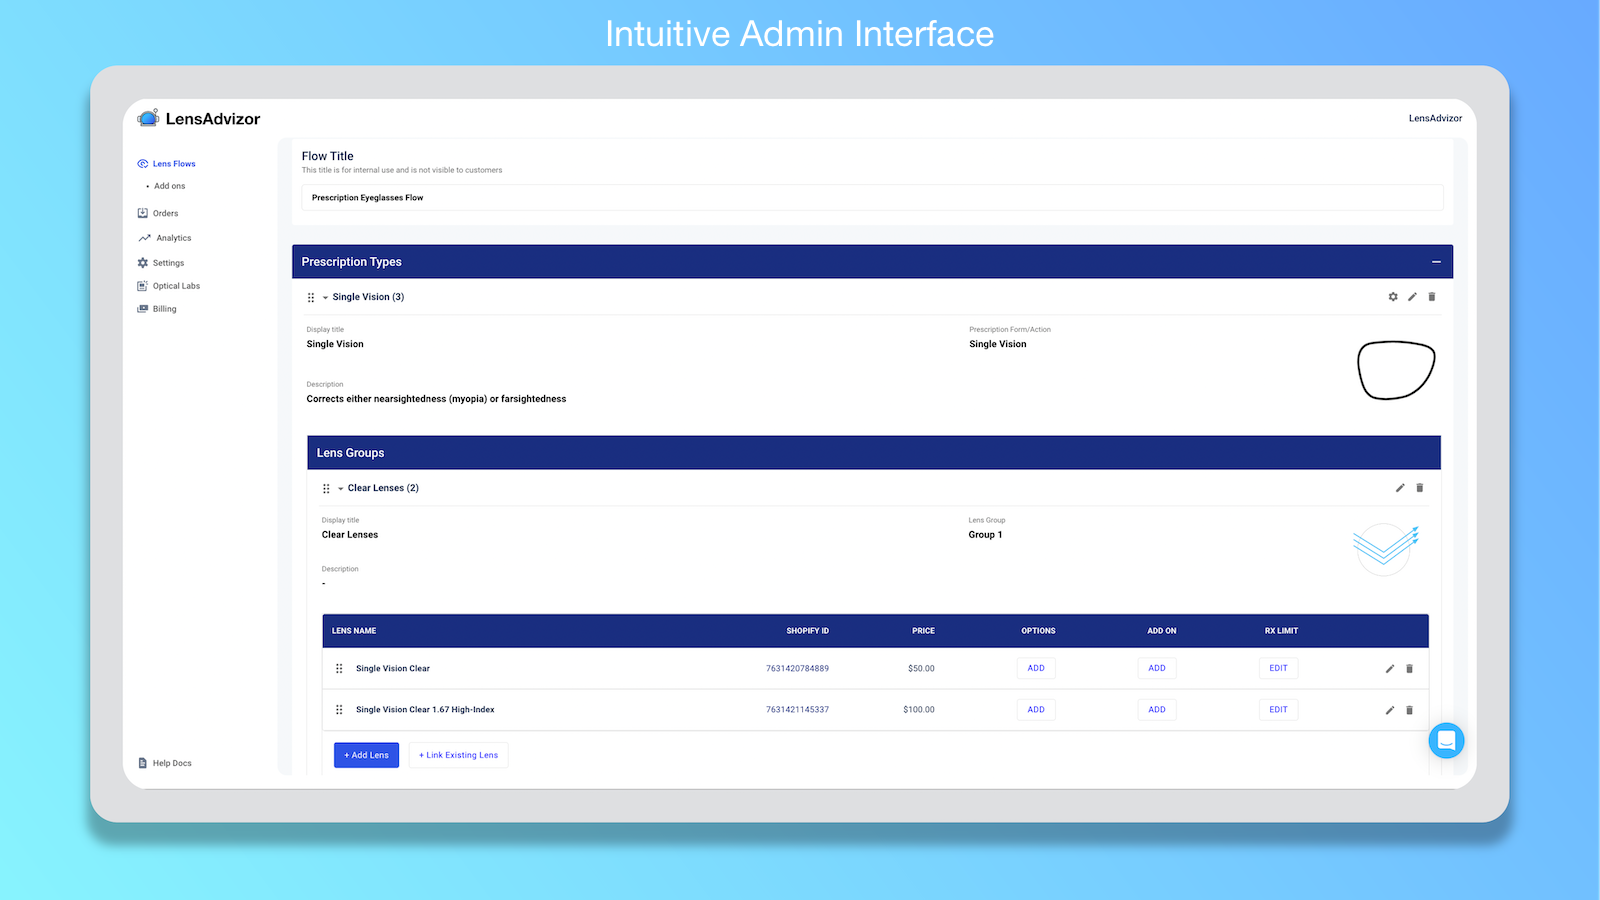 Intuitive Admin Interface